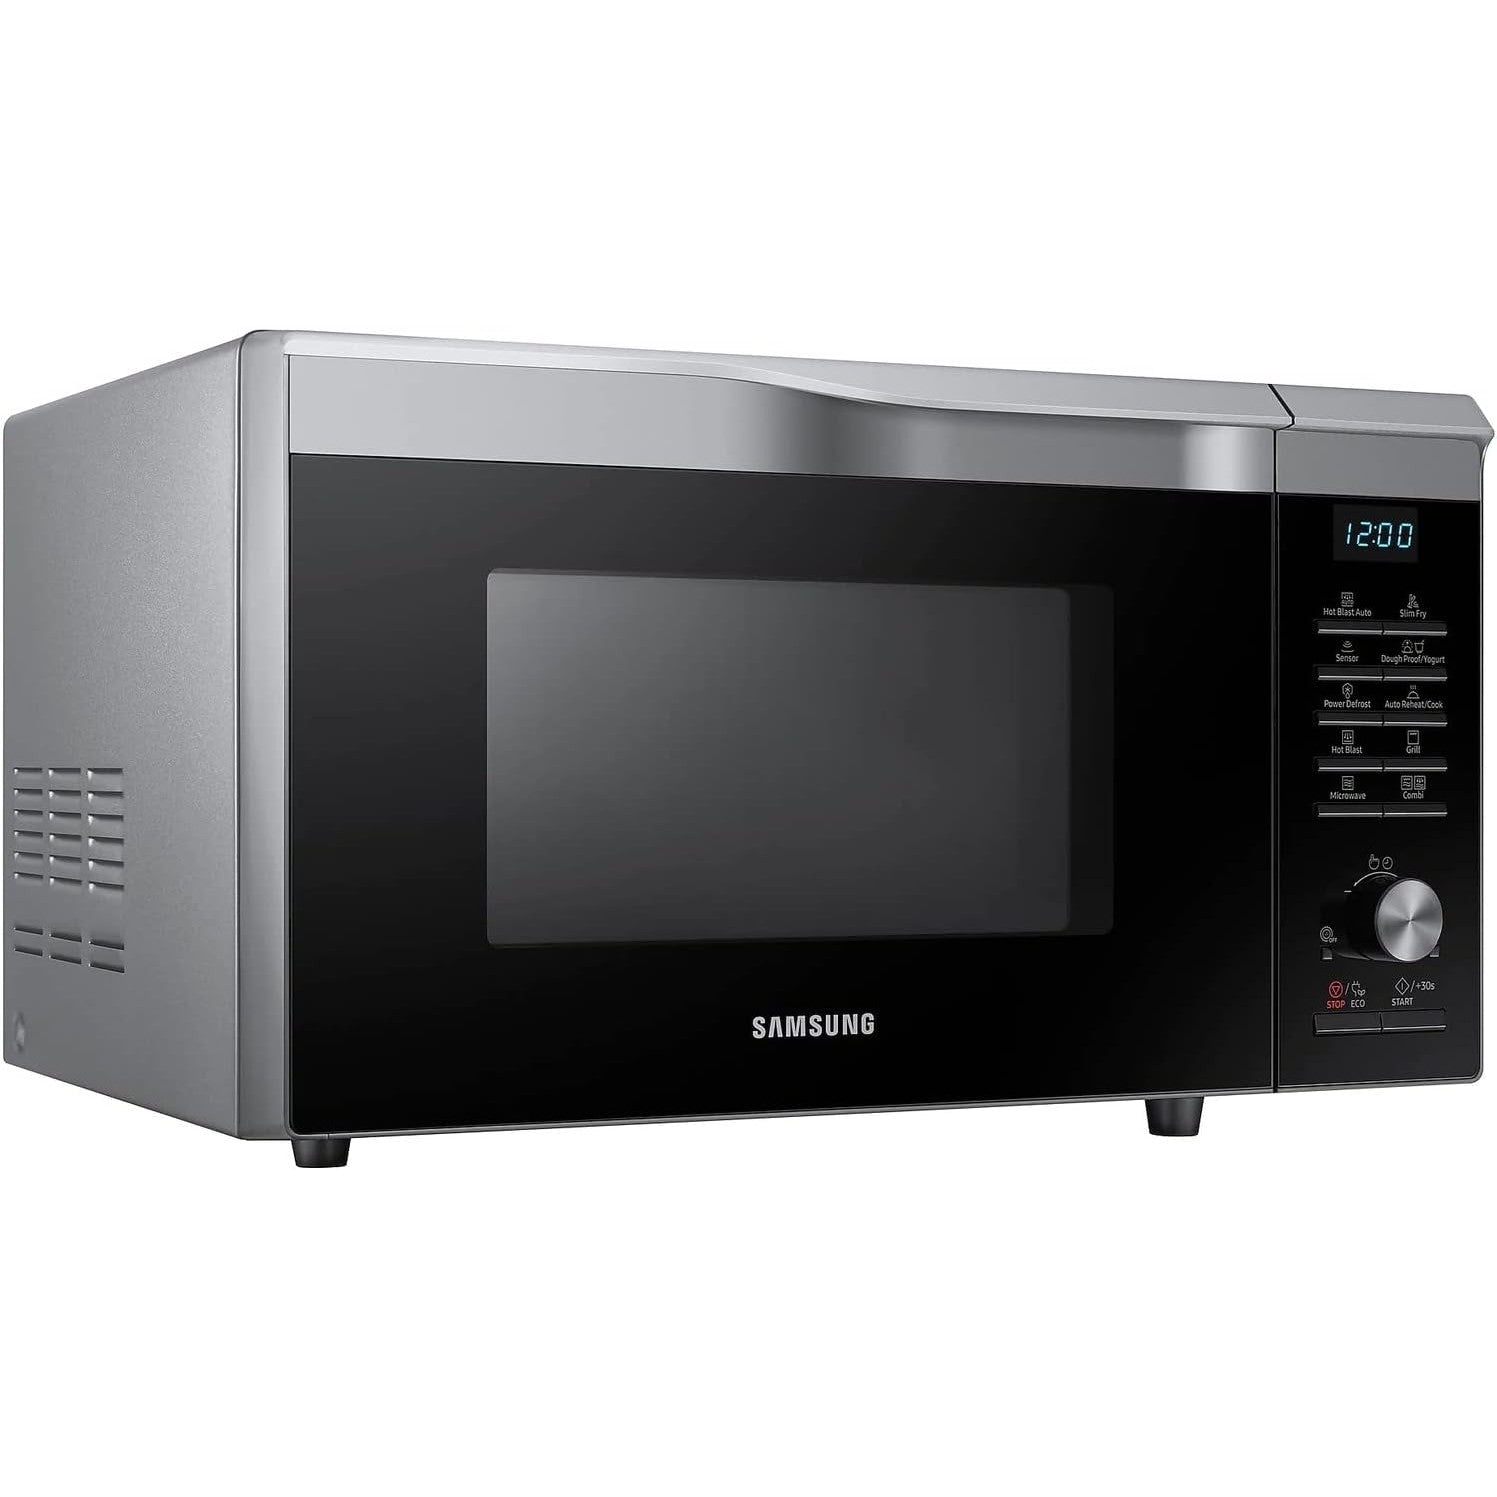 Samsung Easy View MC28M6075CS Combination Microwave Oven - New